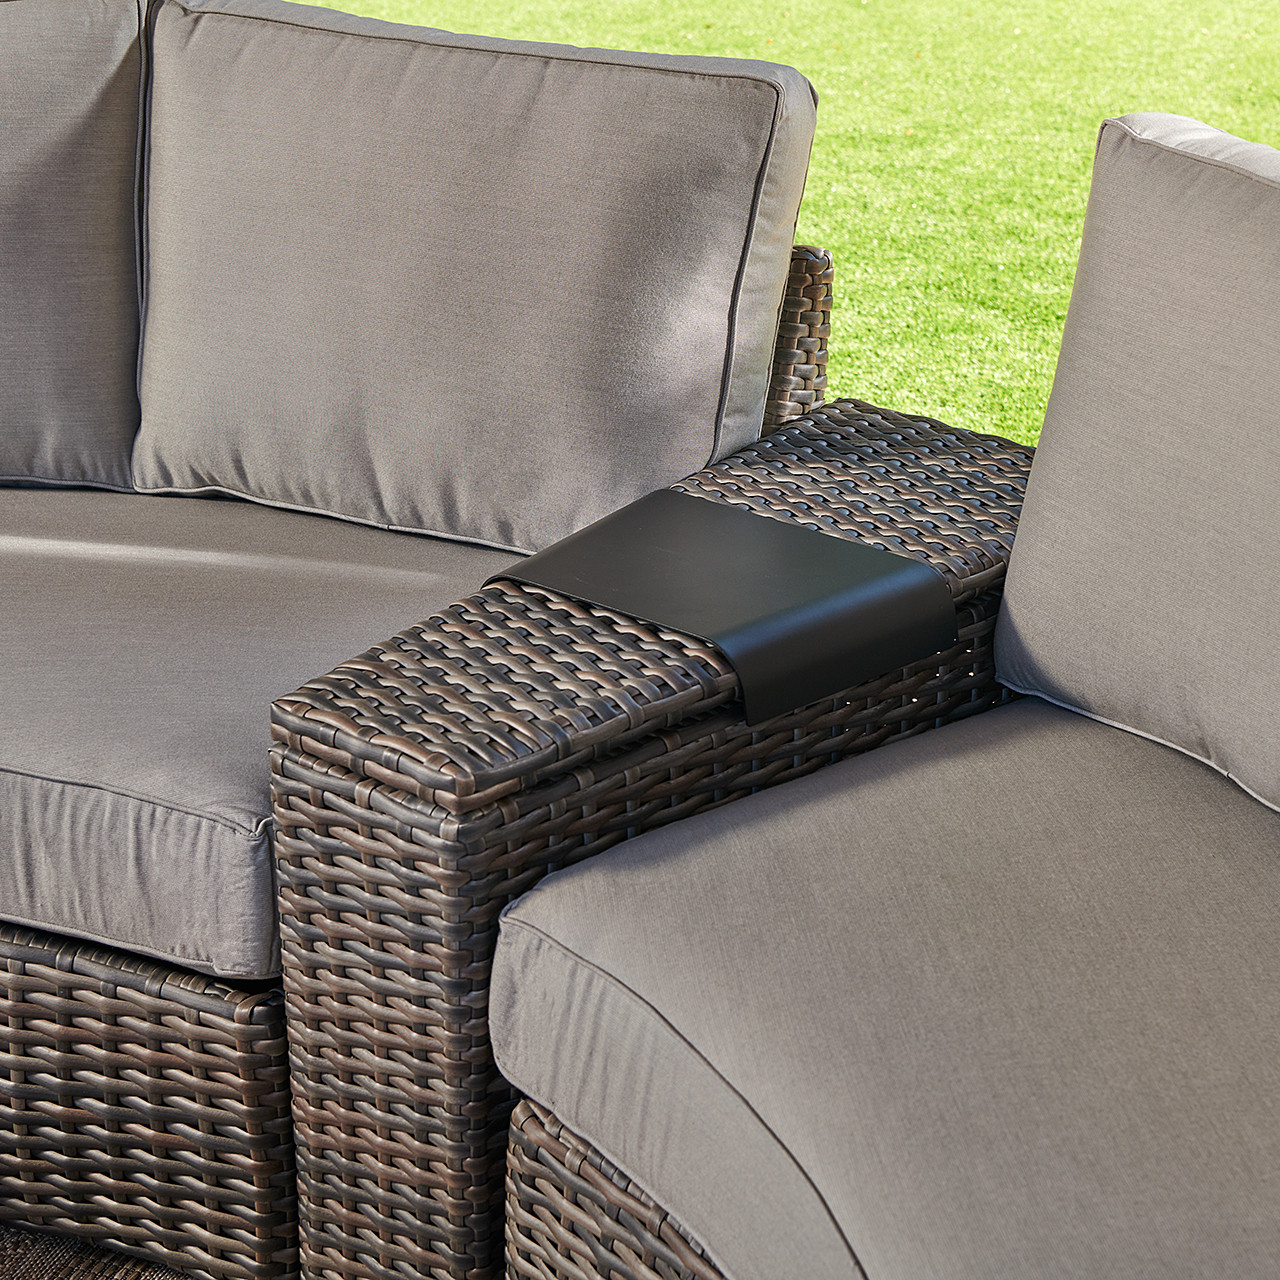 San Lucas Outdoor Wicker with Cushions 4 Piece Sofa Contour Sectional Group